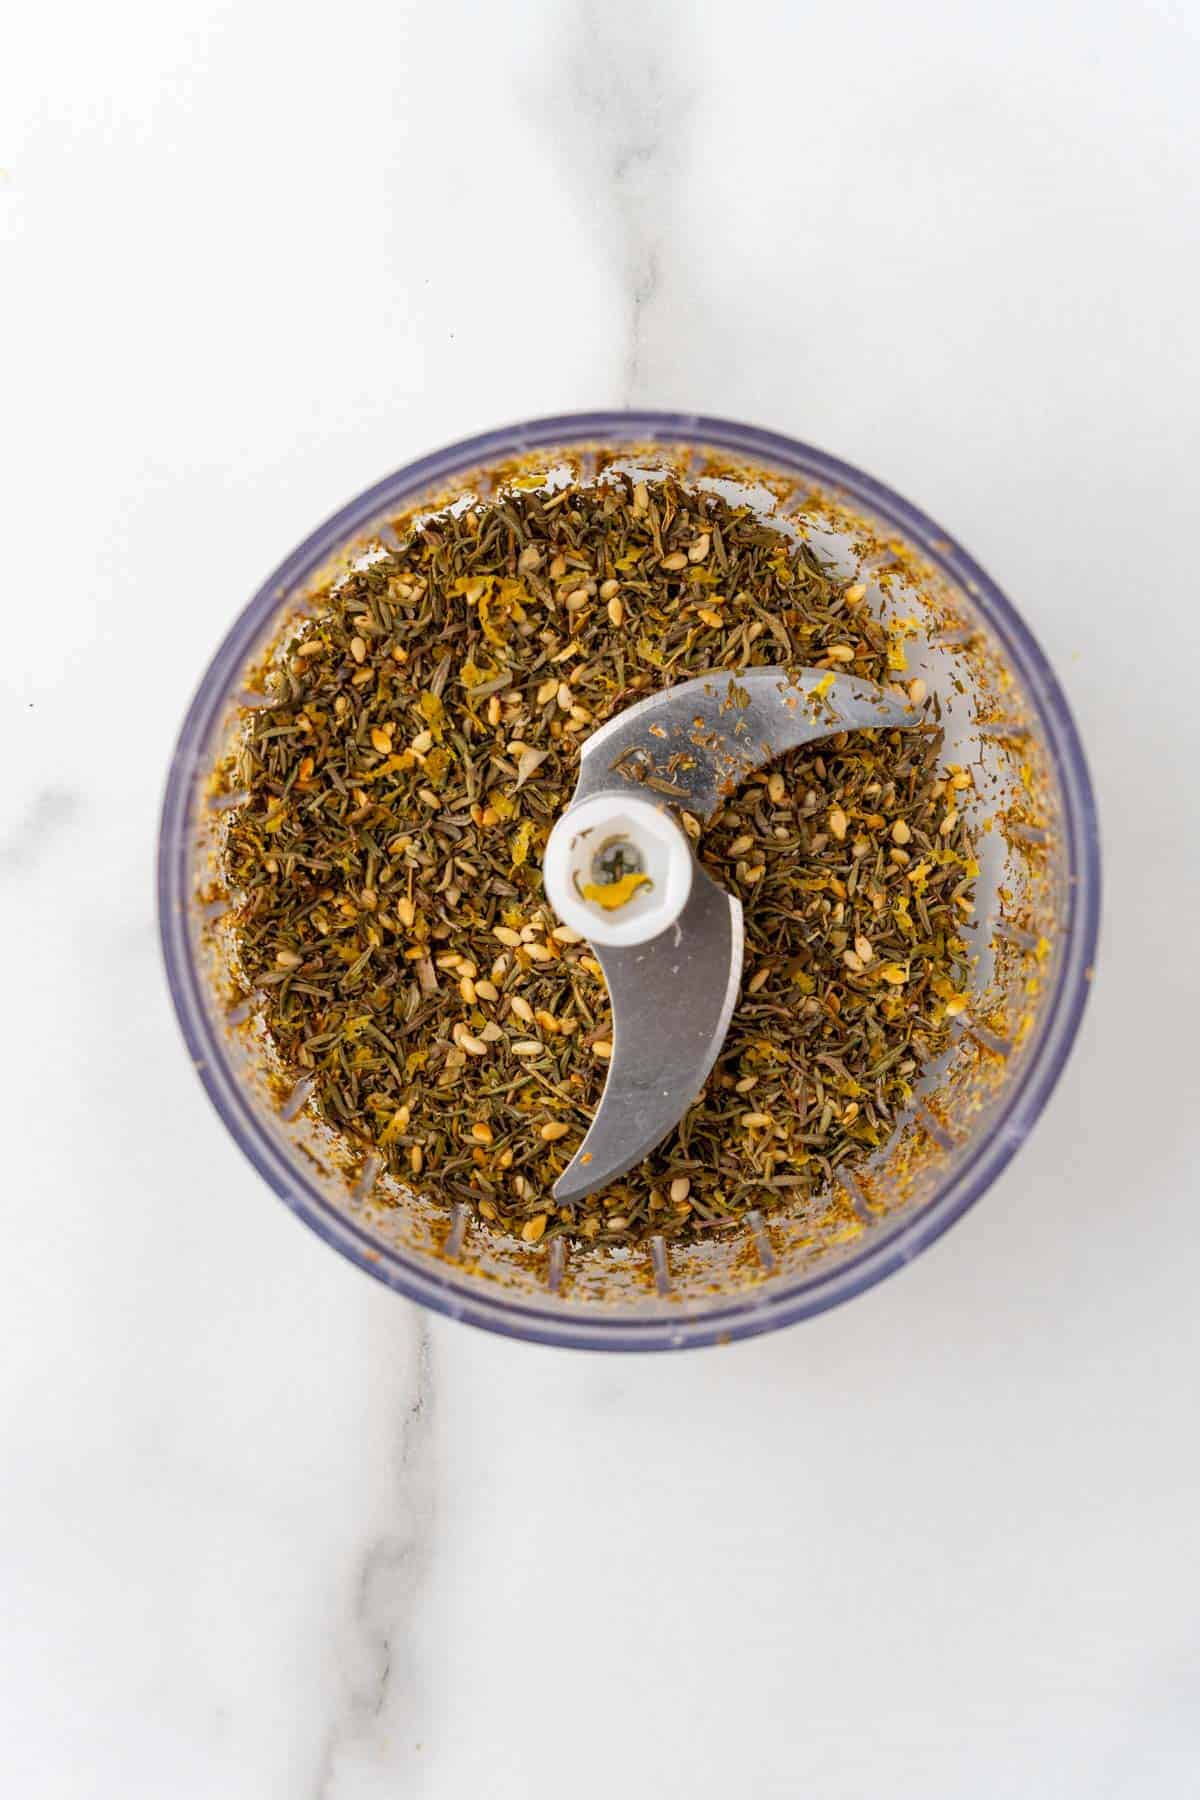 Zaatar in a coffee grinder blended together